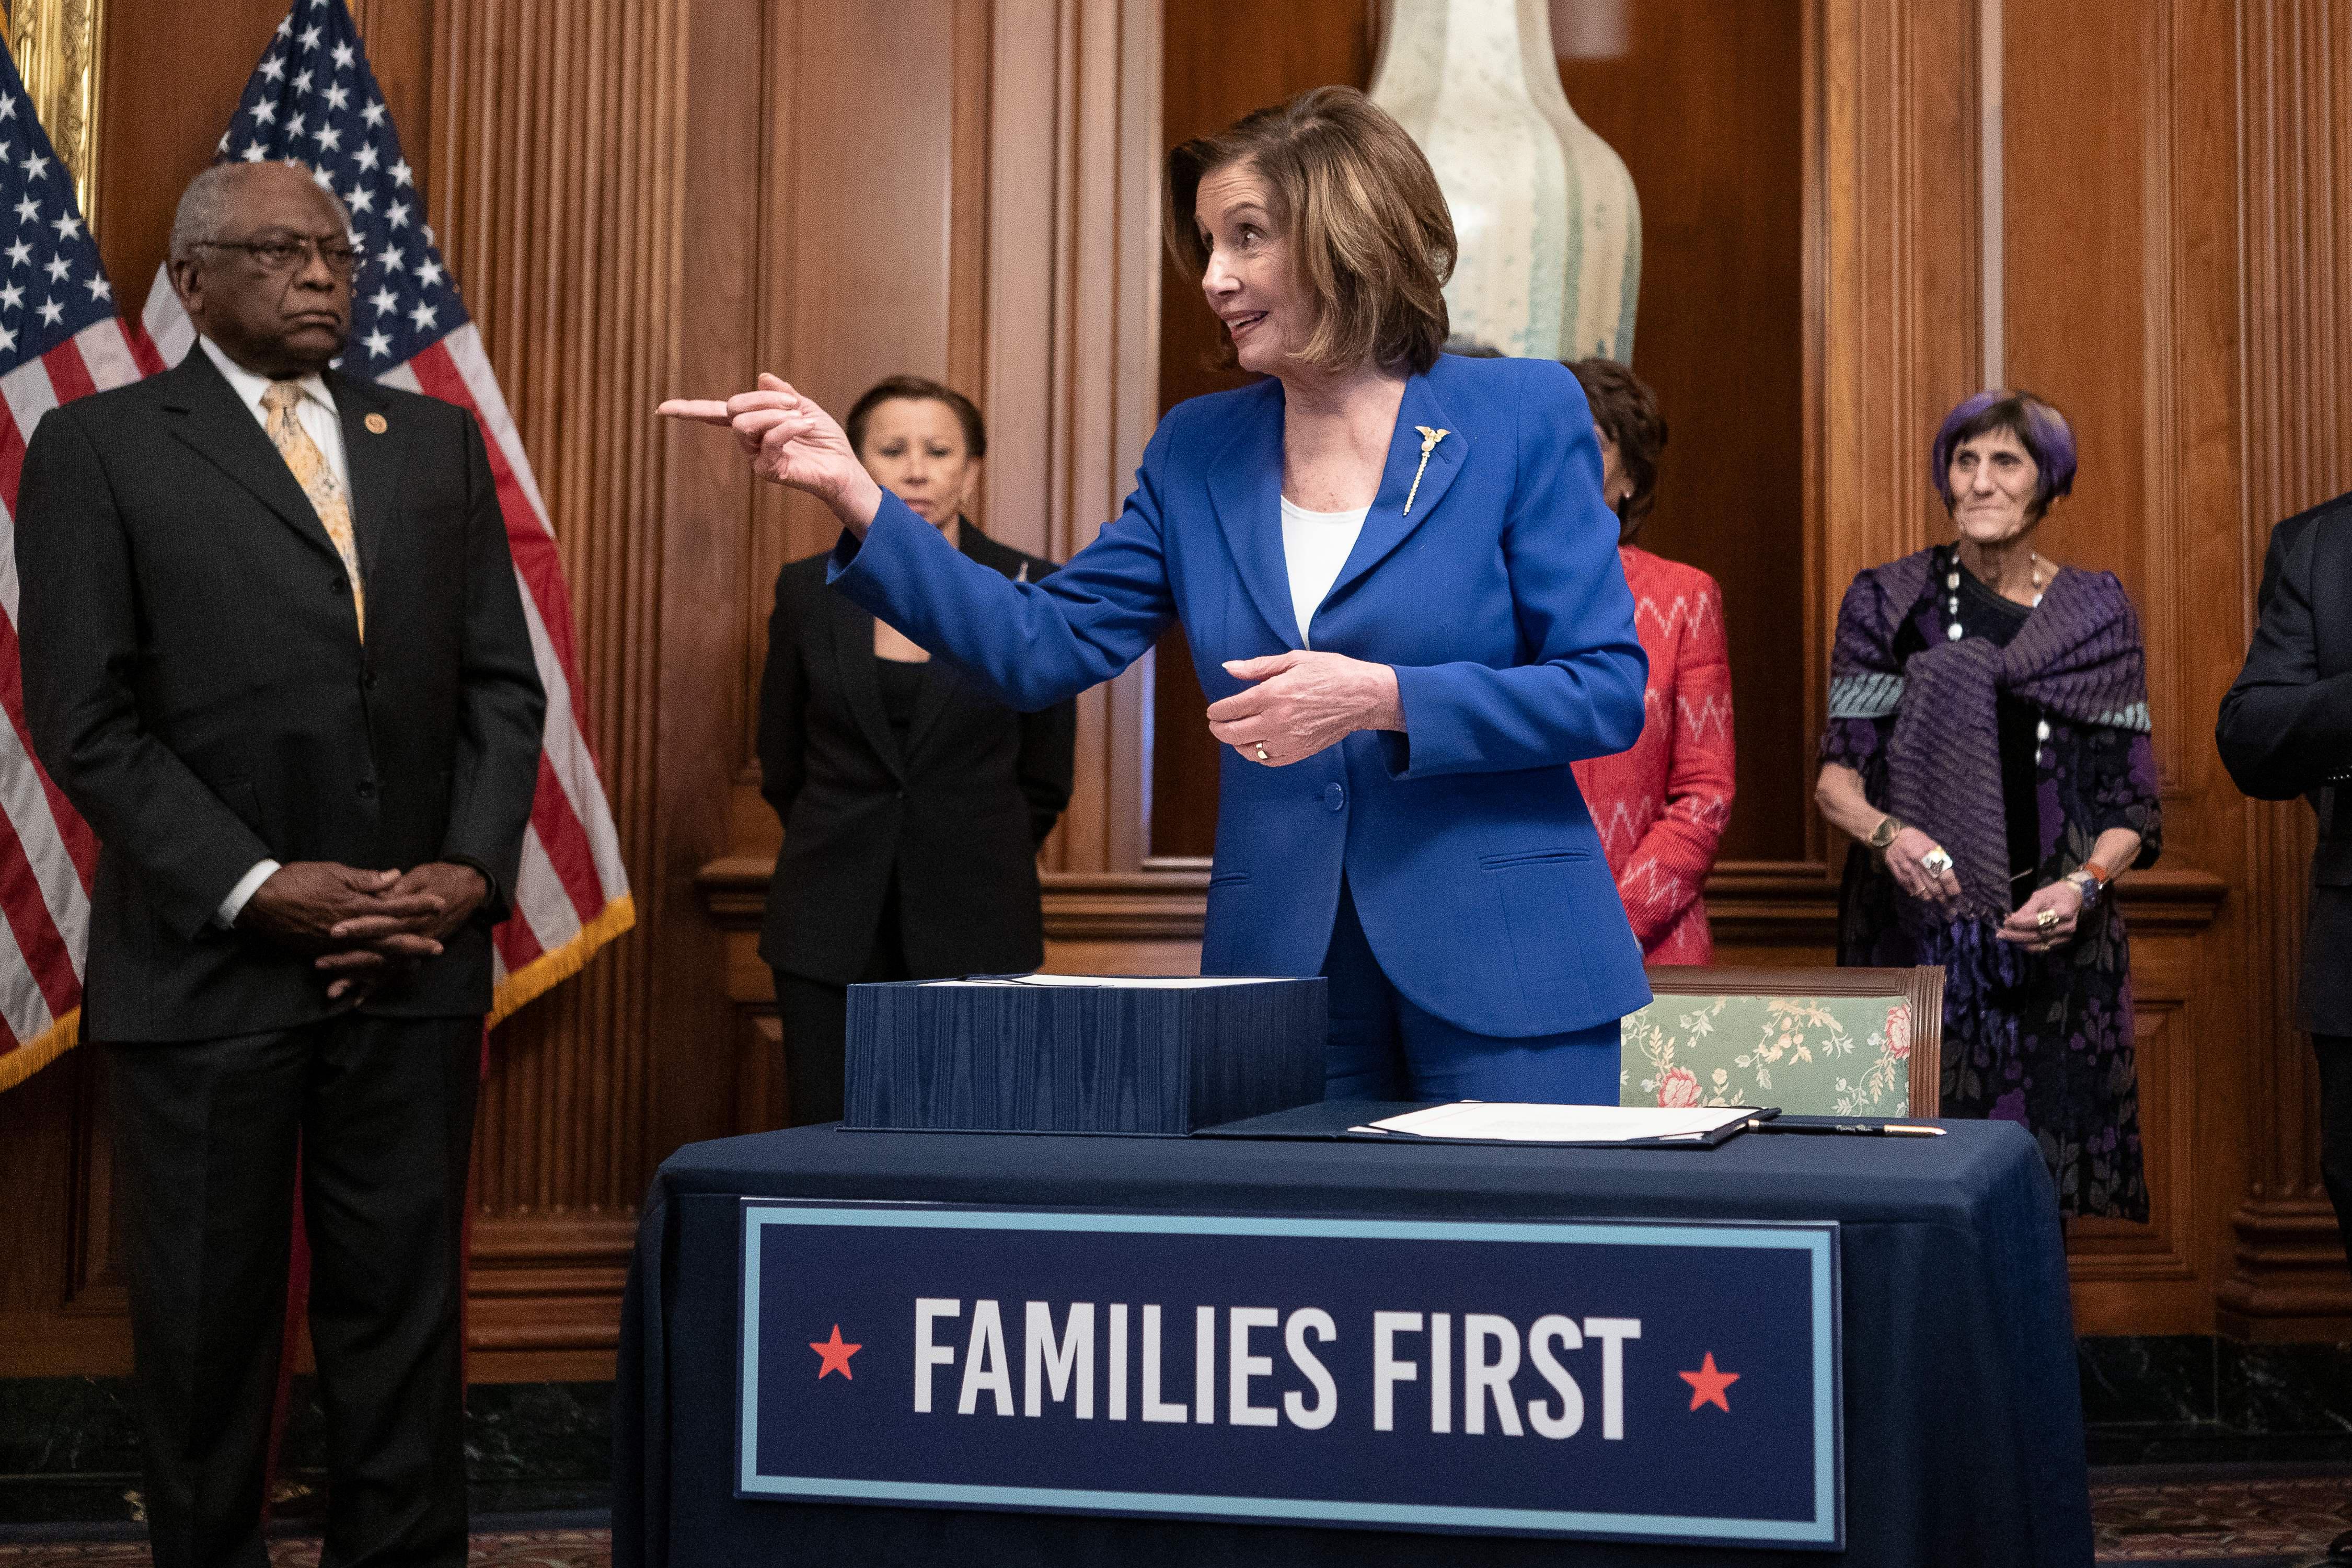 Pelosi points to her right and smiles in front of a table with a banner reading "Families First."